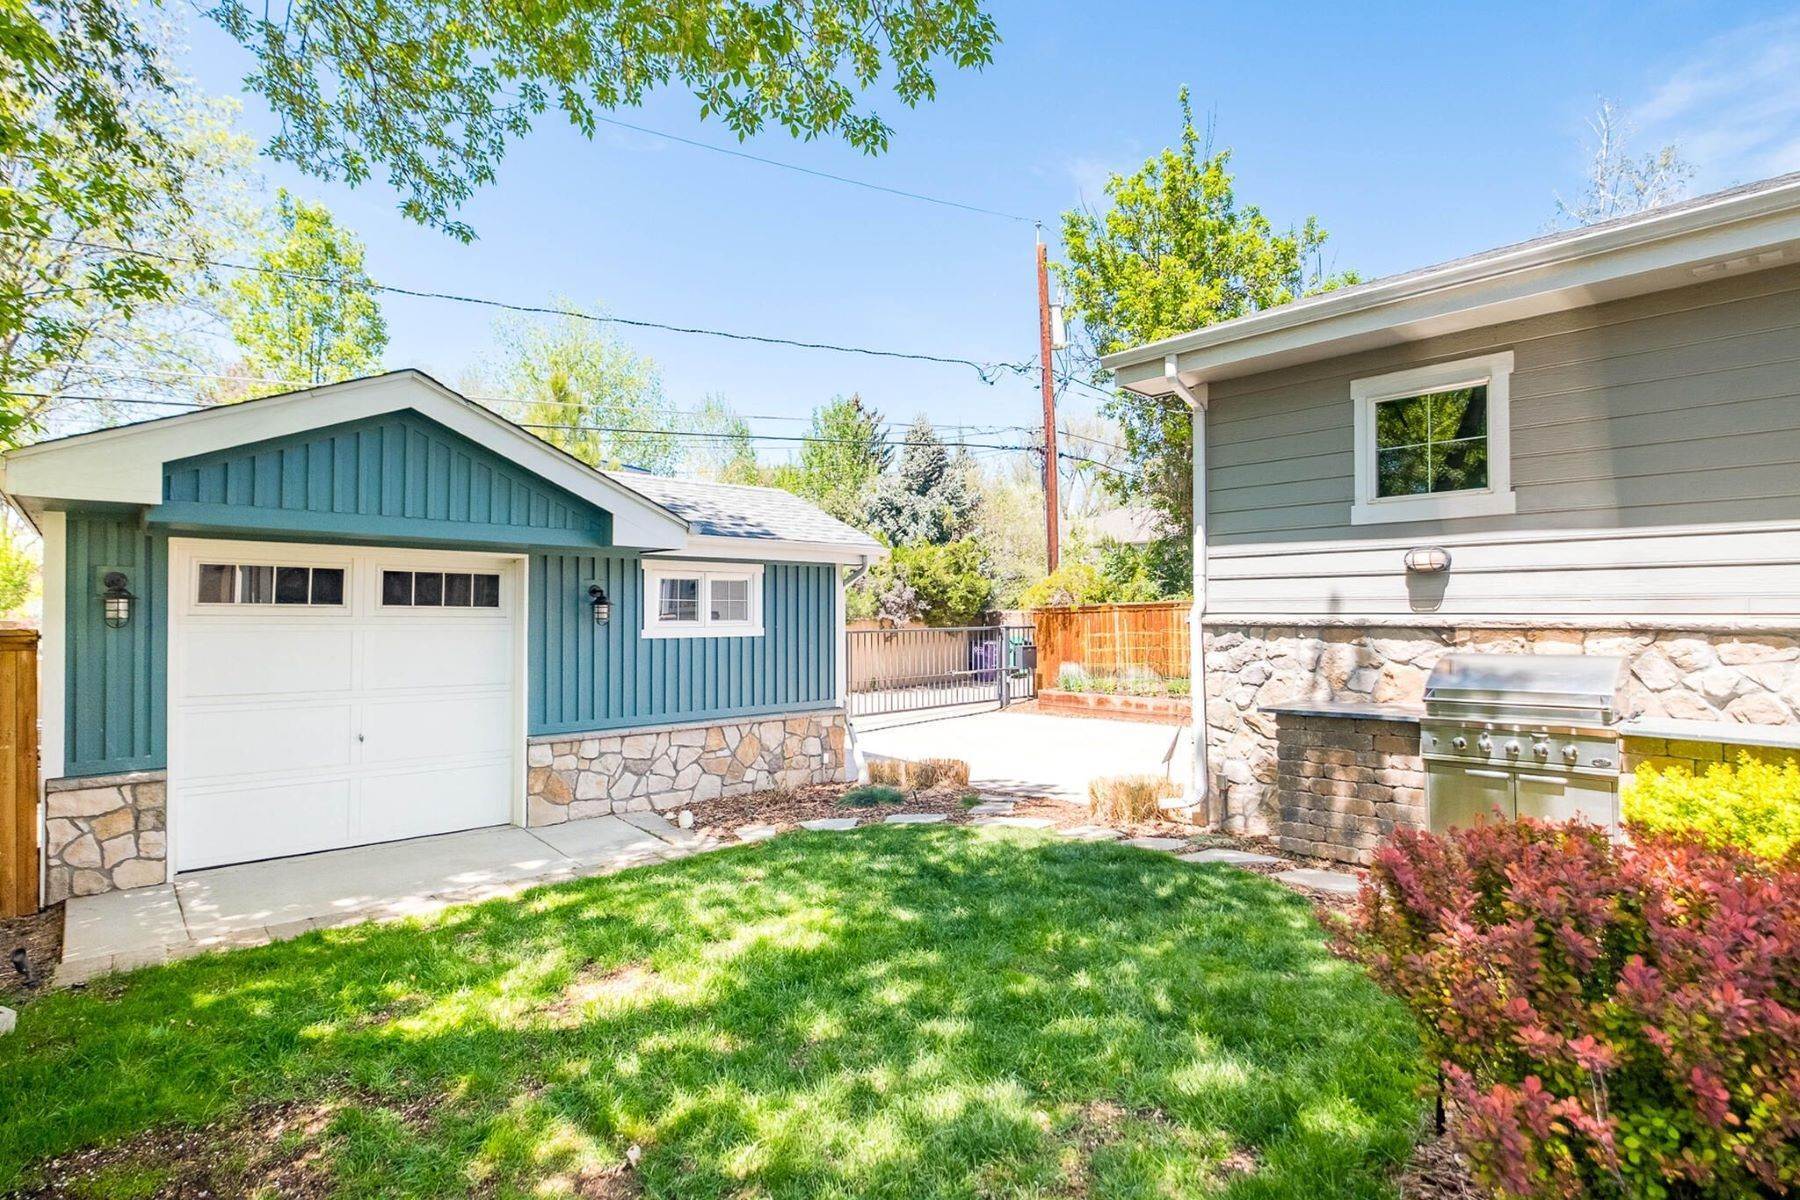 37. Single Family Homes for Active at 2541 S Madison Street, Denver, CO, 80210 2541 S Madison Street Denver, Colorado 80210 United States